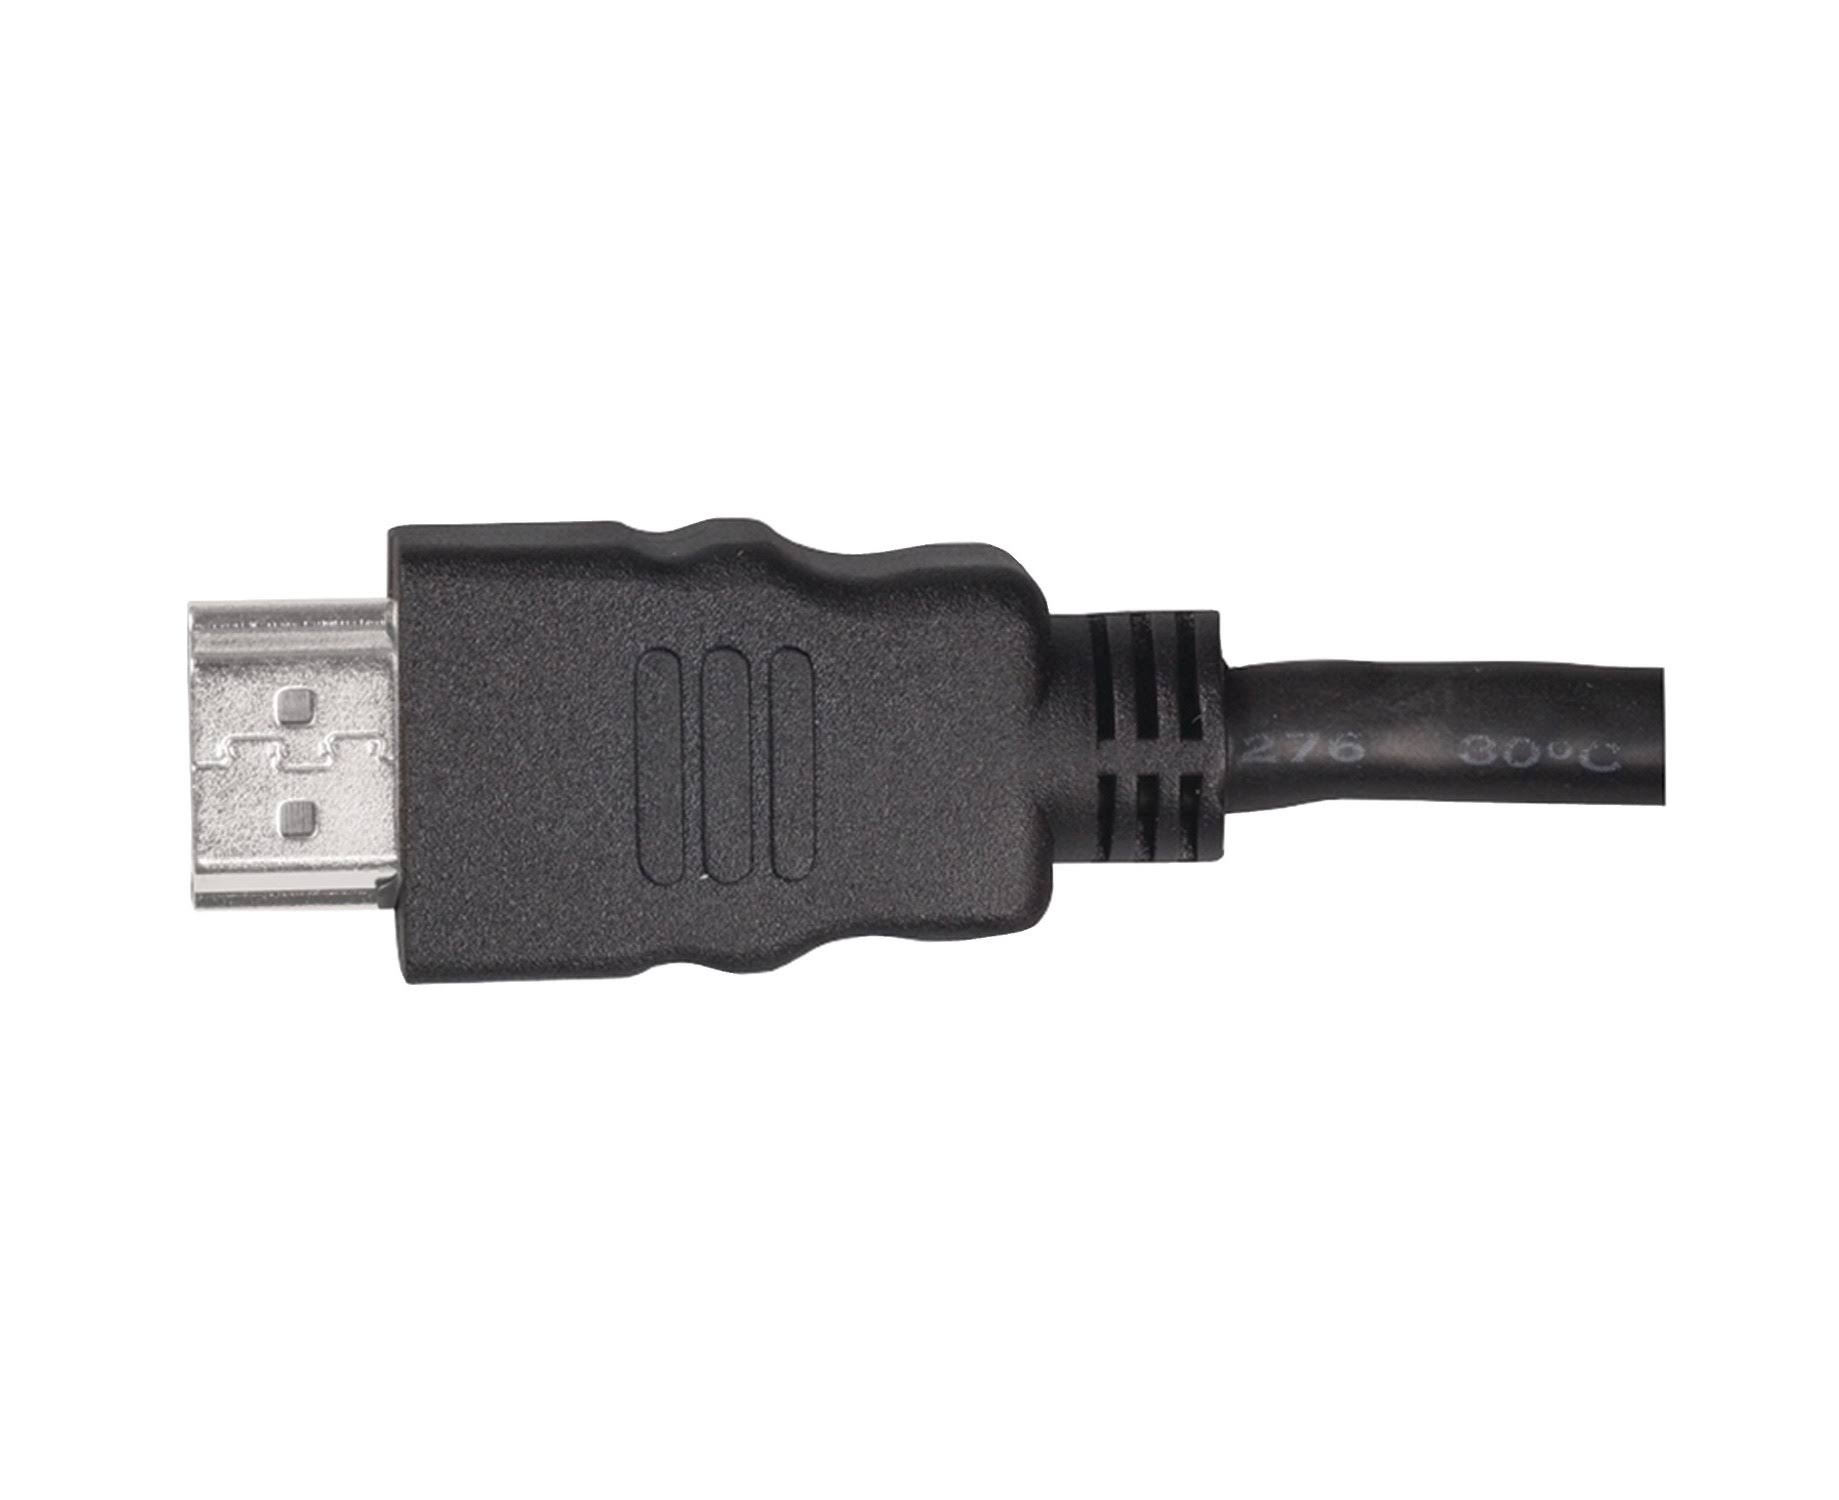 Rca Hdmi Cable - 6' Round, 30Gauge